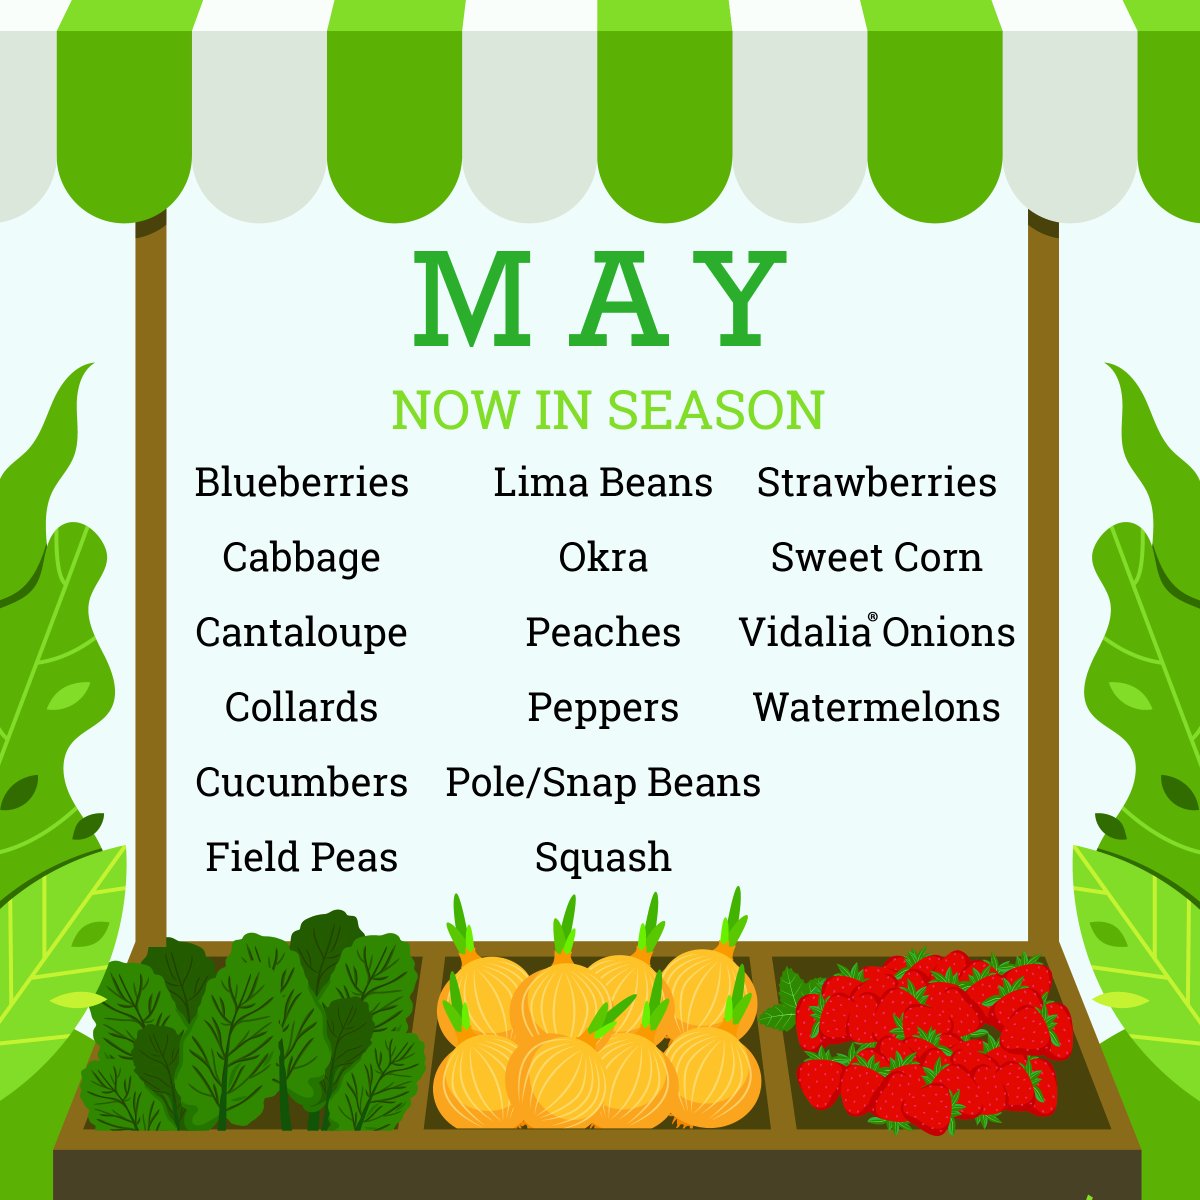 Explore what’s in season with our handy May harvest calendar —we’ve got you covered from blueberries to cabbage. Stay tuned for next month’s picks & savor the best of each season! #Georgia #Agriculture #HarvestCalendar #Produce #InSeason #Agribusiness #GeorgiaGrown #BuyLocal